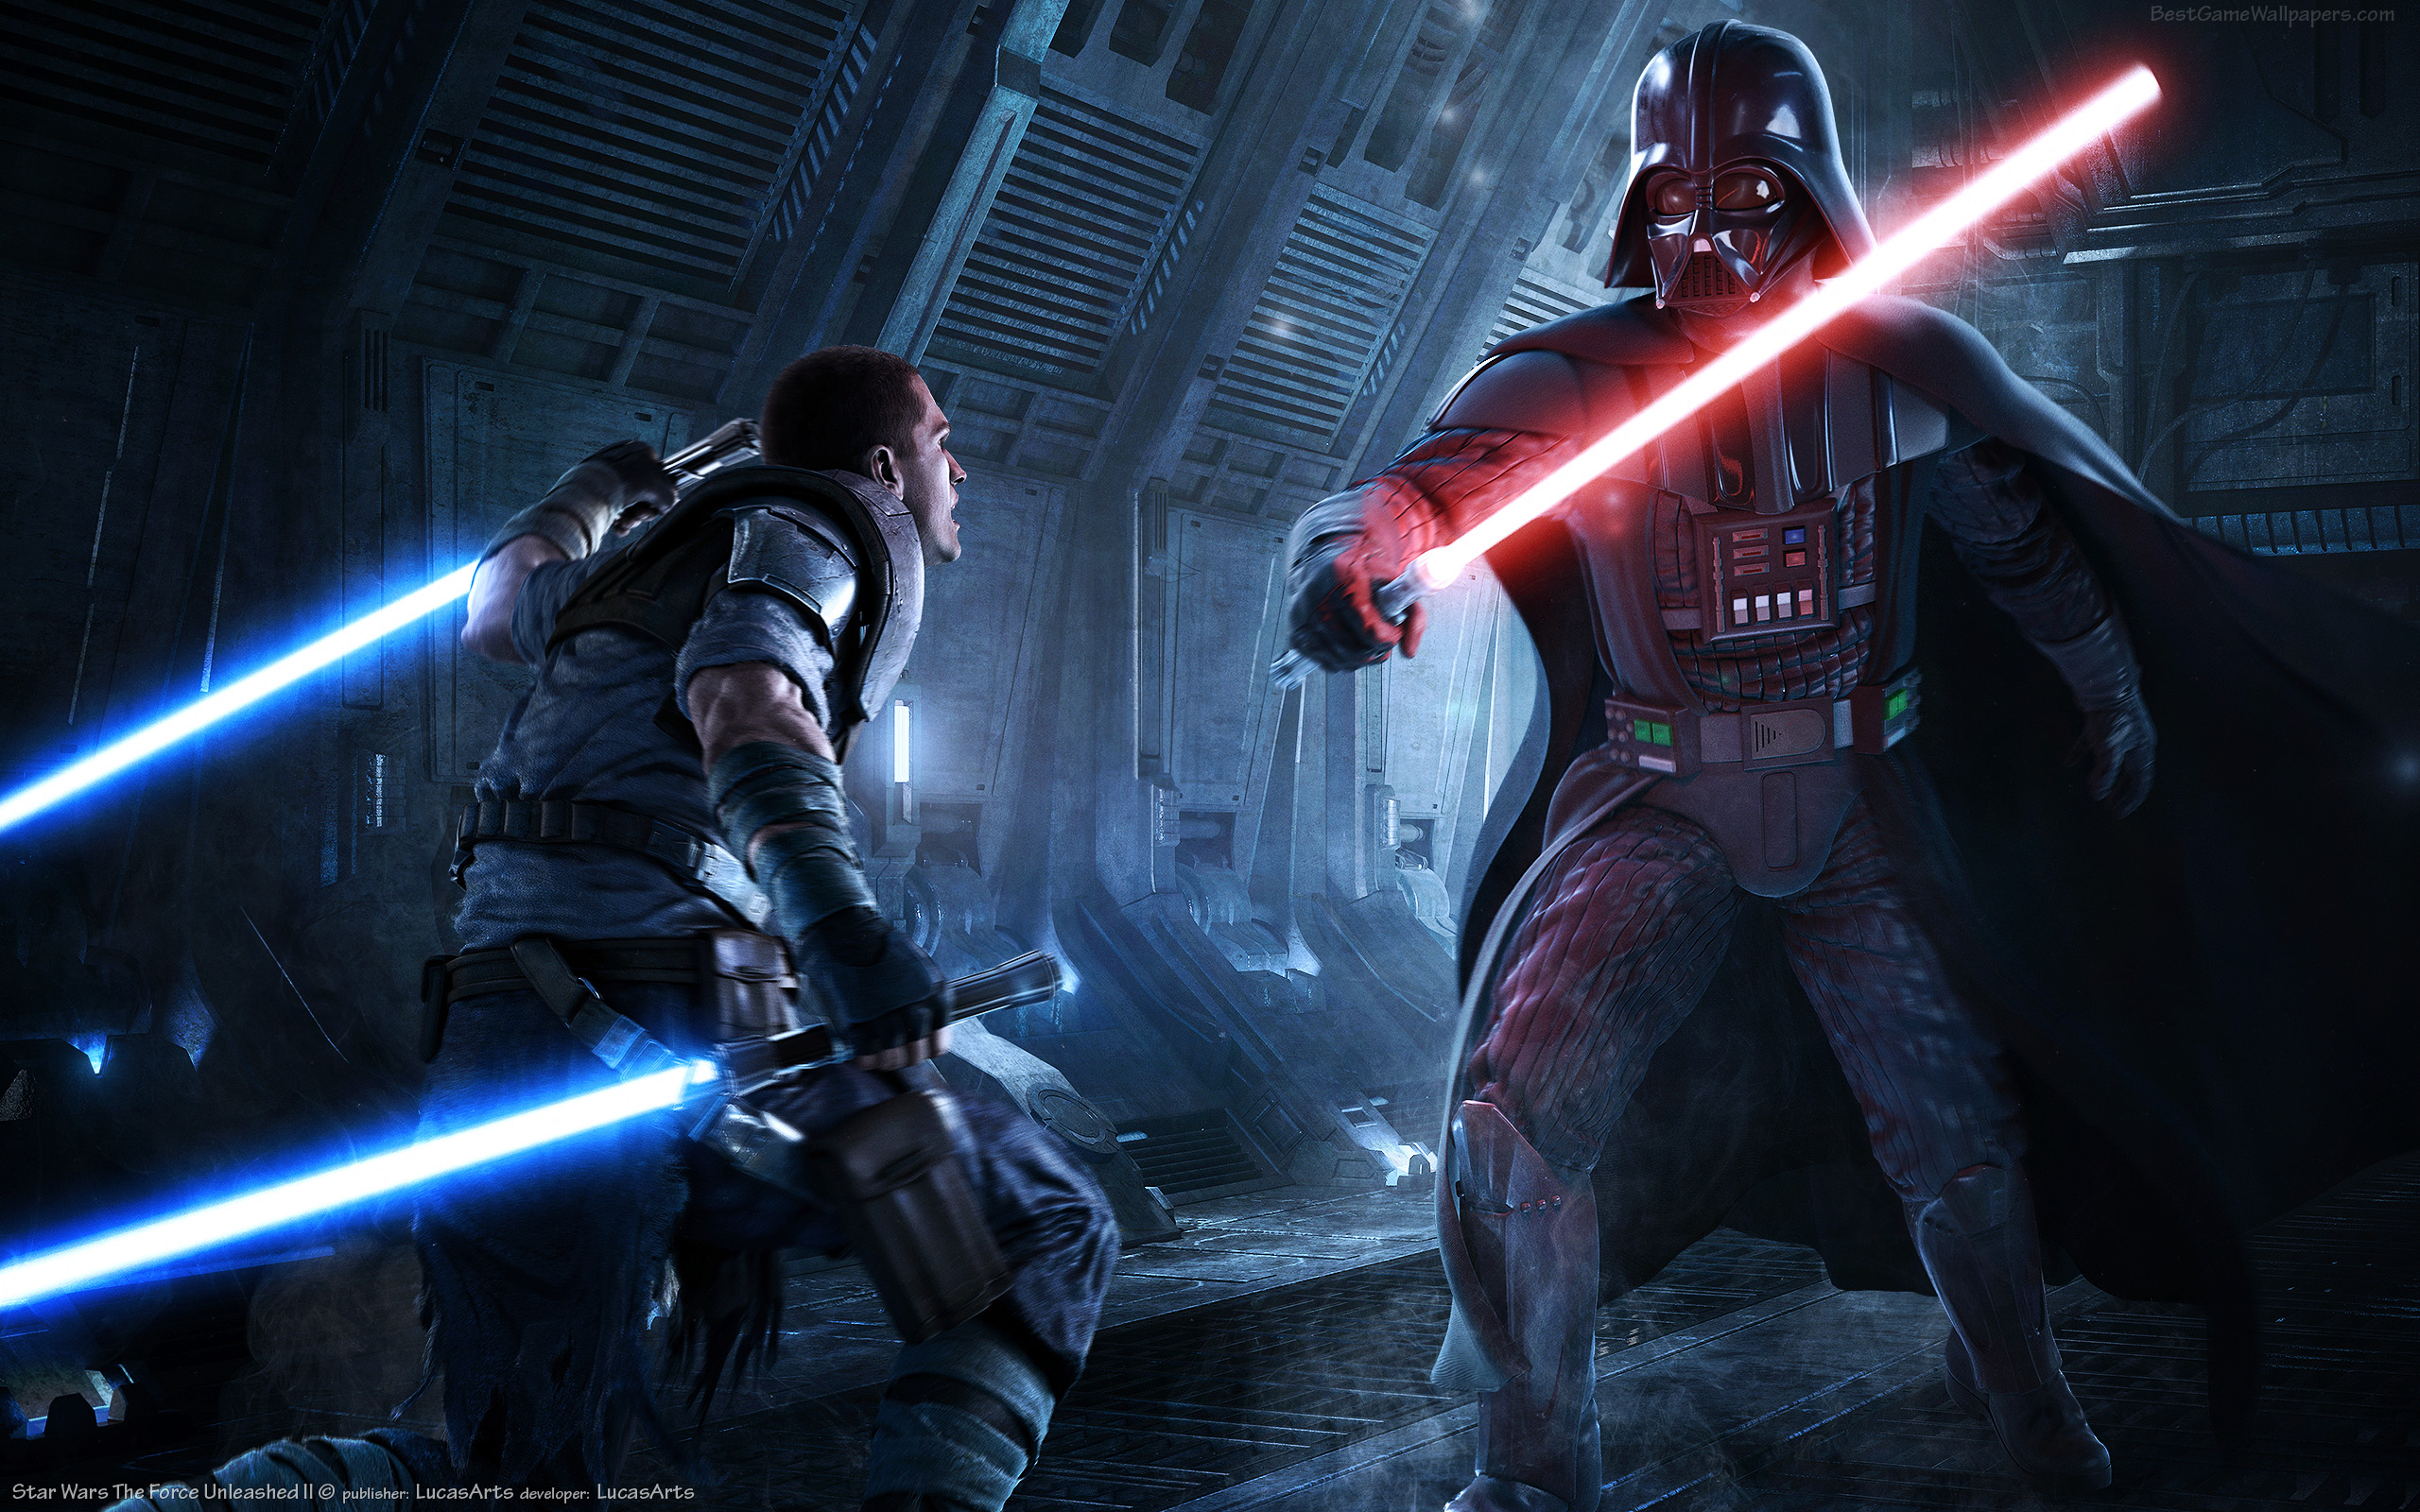 High Resolution Wallpaper | Star Wars: The Force Unleashed II 2560x1600 px